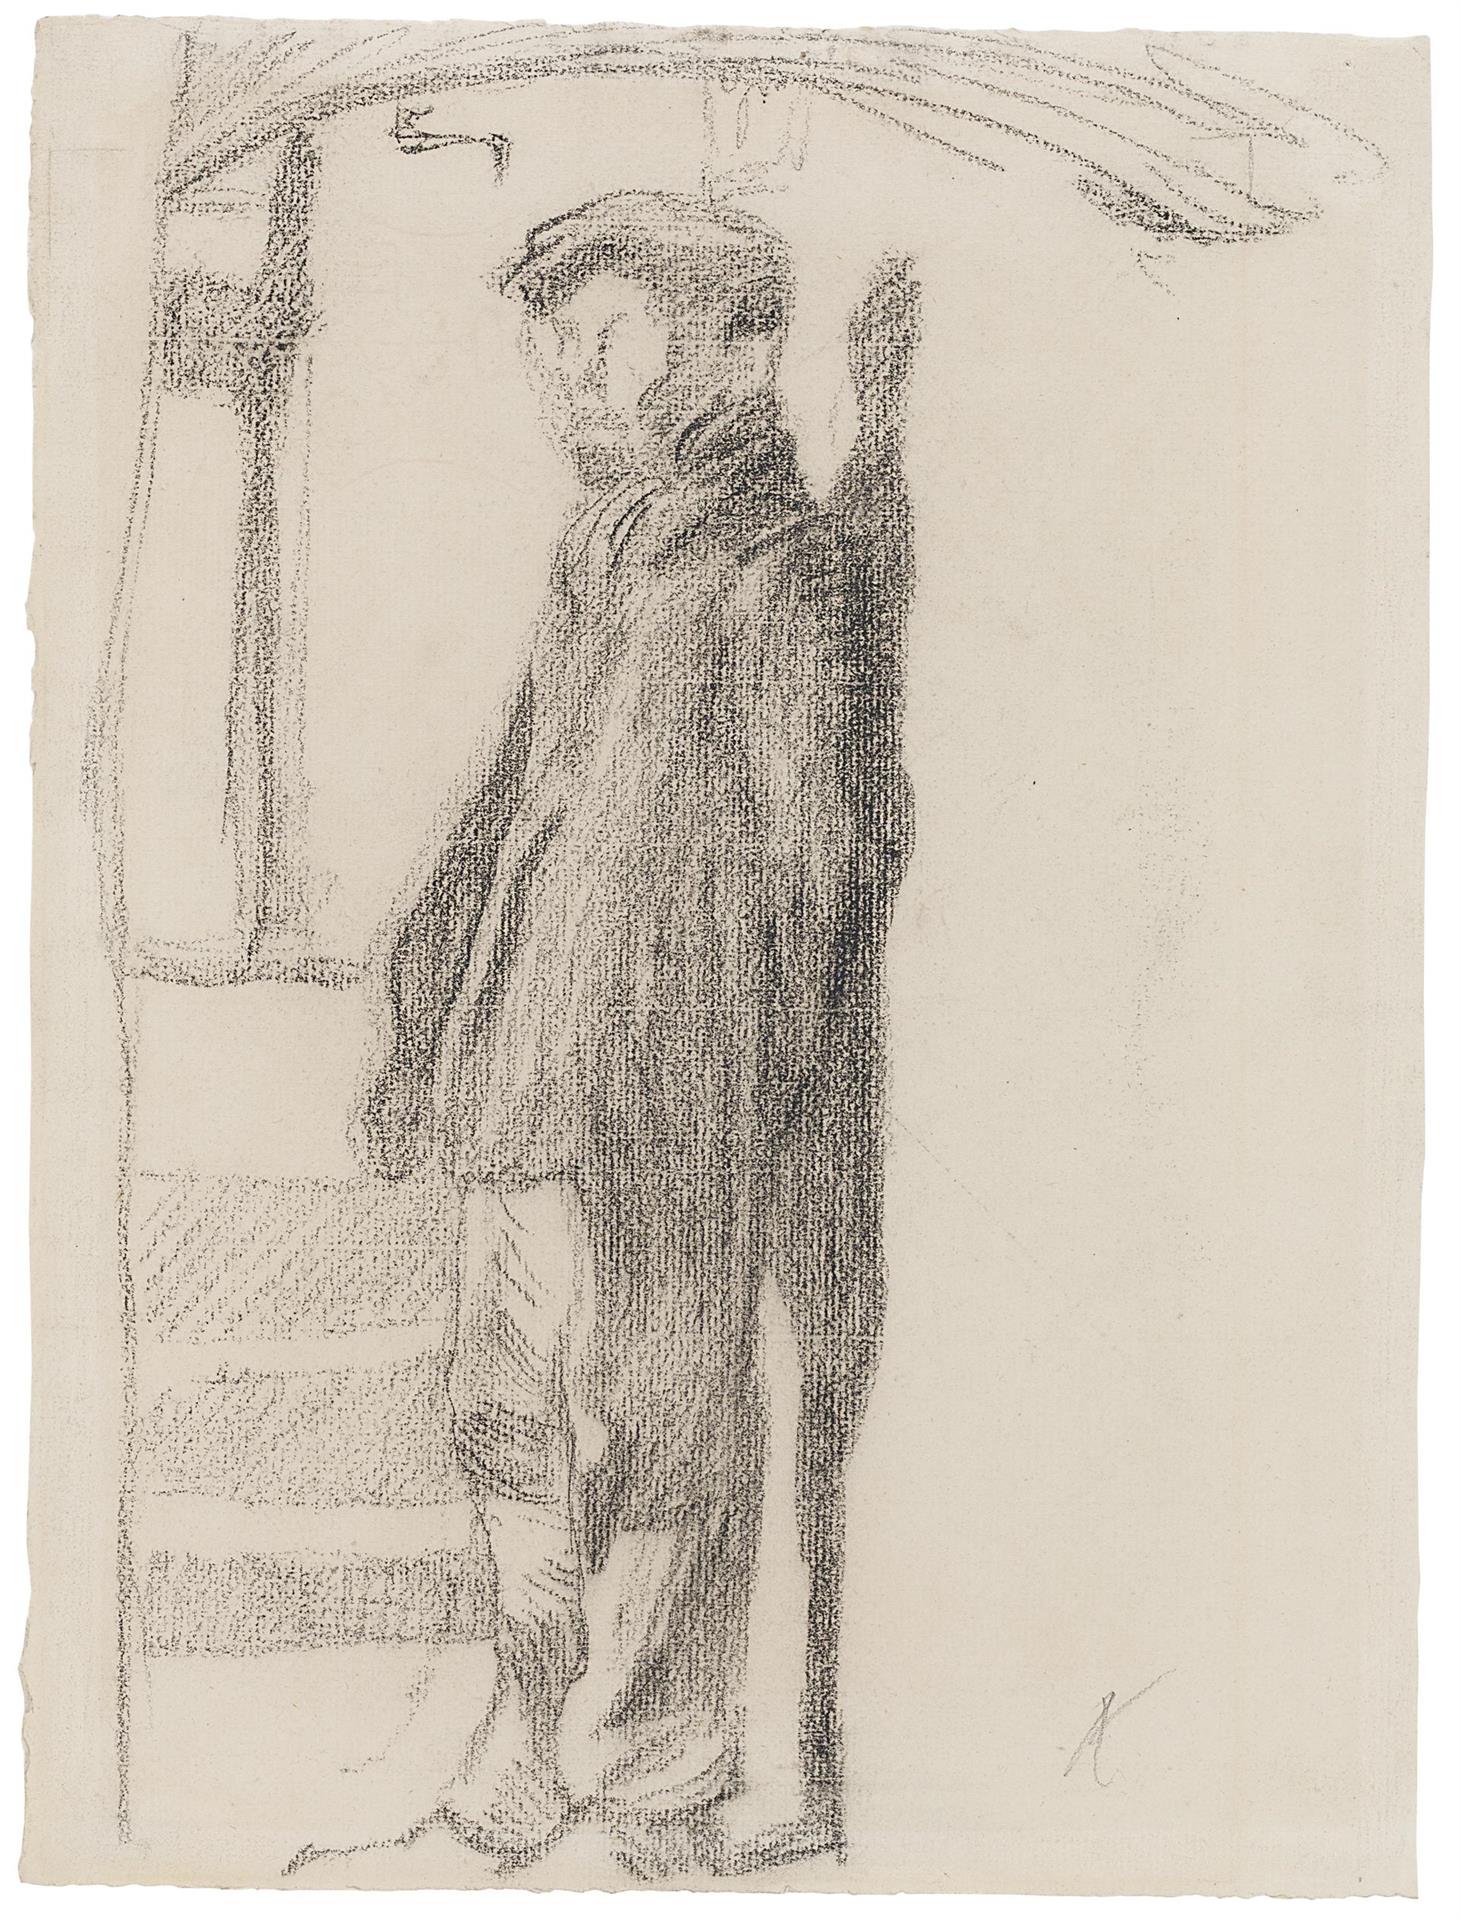 Käthe Kollwitz, Man, standing, leaning his back against a wall, 1904, black chalk on laid paper, NT 275a, Cologne Kollwitz Collection © Käthe Kollwitz Museum Köln